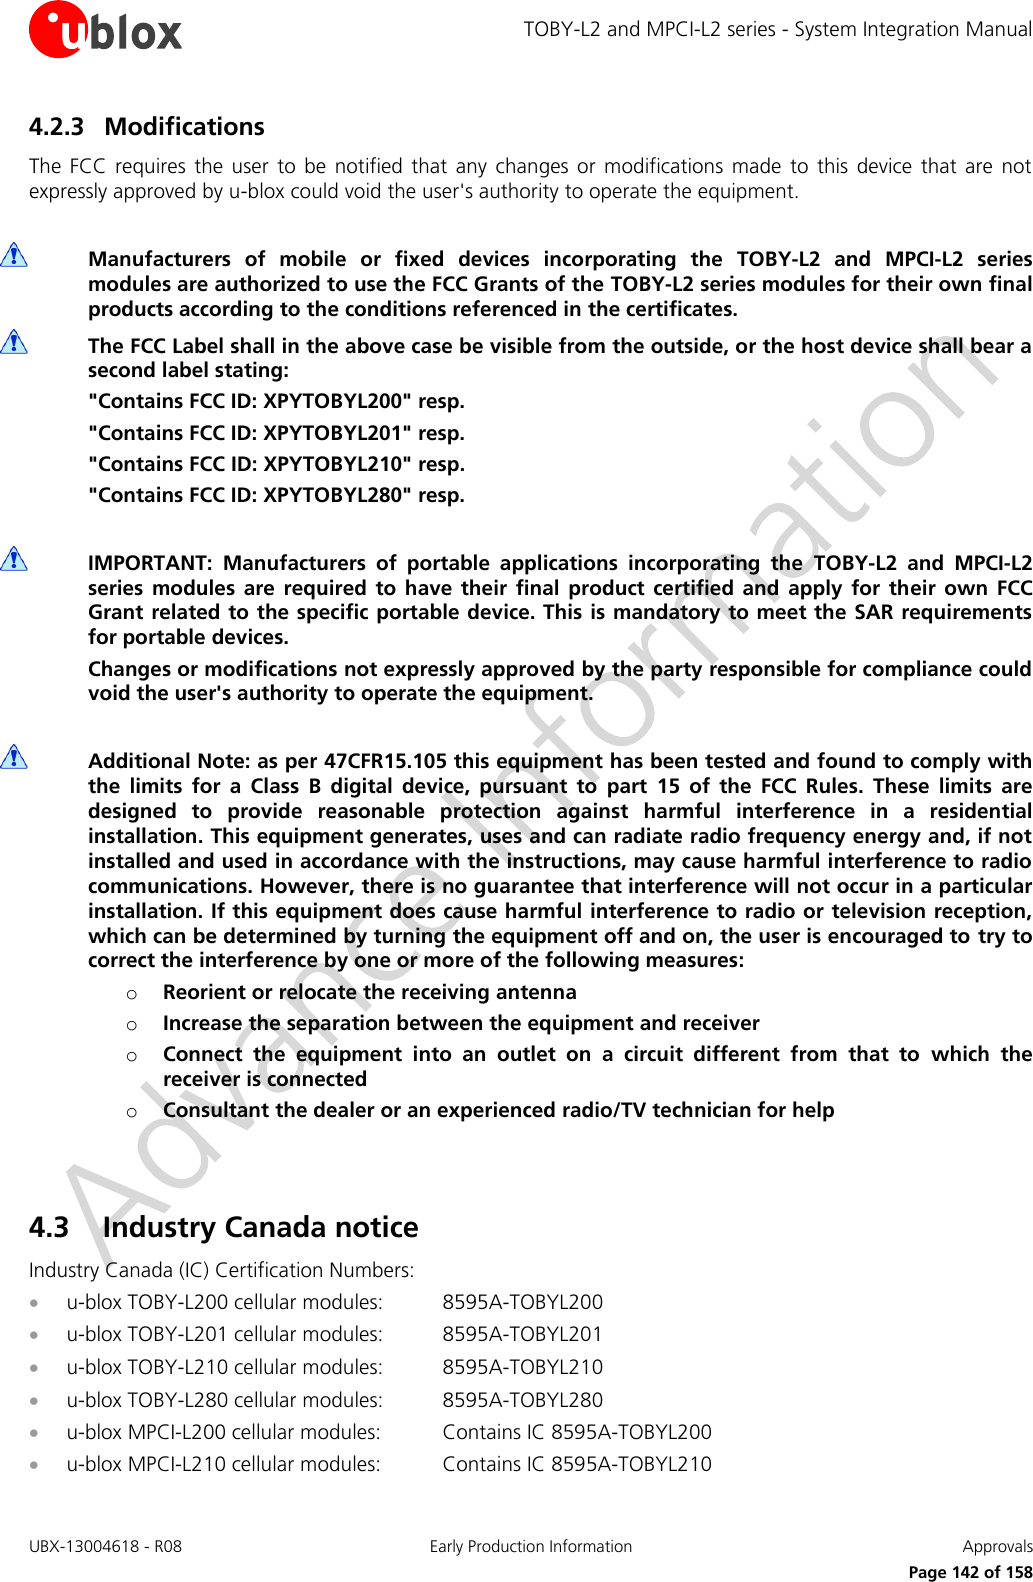 TOBY-L2 and MPCI-L2 series - System Integration Manual UBX-13004618 - R08  Early Production Information  Approvals     Page 142 of 158 4.2.3 Modifications The  FCC  requires  the  user  to  be  notified  that  any  changes  or  modifications  made  to  this  device  that  are  not expressly approved by u-blox could void the user&apos;s authority to operate the equipment.   Manufacturers  of  mobile  or  fixed  devices  incorporating  the  TOBY-L2  and  MPCI-L2  series modules are authorized to use the FCC Grants of the TOBY-L2 series modules for their own final products according to the conditions referenced in the certificates.  The FCC Label shall in the above case be visible from the outside, or the host device shall bear a second label stating: &quot;Contains FCC ID: XPYTOBYL200&quot; resp. &quot;Contains FCC ID: XPYTOBYL201&quot; resp. &quot;Contains FCC ID: XPYTOBYL210&quot; resp. &quot;Contains FCC ID: XPYTOBYL280&quot; resp.   IMPORTANT:  Manufacturers  of  portable  applications  incorporating  the  TOBY-L2  and  MPCI-L2 series  modules  are  required  to  have  their  final  product  certified  and  apply  for  their  own  FCC Grant related to  the specific portable device. This is mandatory to meet the SAR requirements for portable devices. Changes or modifications not expressly approved by the party responsible for compliance could void the user&apos;s authority to operate the equipment.   Additional Note: as per 47CFR15.105 this equipment has been tested and found to comply with the  limits  for  a  Class  B  digital  device,  pursuant  to  part  15  of  the  FCC  Rules.  These  limits  are designed  to  provide  reasonable  protection  against  harmful  interference  in  a  residential installation. This equipment generates, uses and can radiate radio frequency energy and, if not installed and used in accordance with the instructions, may cause harmful interference to radio communications. However, there is no guarantee that interference will not occur in a particular installation. If this equipment does cause harmful interference to radio or television reception, which can be determined by turning the equipment off and on, the user is encouraged to try to correct the interference by one or more of the following measures: o Reorient or relocate the receiving antenna o Increase the separation between the equipment and receiver o Connect  the  equipment  into  an  outlet  on  a  circuit  different  from  that  to  which  the receiver is connected o Consultant the dealer or an experienced radio/TV technician for help   4.3 Industry Canada notice  Industry Canada (IC) Certification Numbers:  u-blox TOBY-L200 cellular modules:  8595A-TOBYL200  u-blox TOBY-L201 cellular modules:  8595A-TOBYL201  u-blox TOBY-L210 cellular modules:  8595A-TOBYL210  u-blox TOBY-L280 cellular modules:  8595A-TOBYL280  u-blox MPCI-L200 cellular modules:  Contains IC 8595A-TOBYL200  u-blox MPCI-L210 cellular modules:  Contains IC 8595A-TOBYL210 